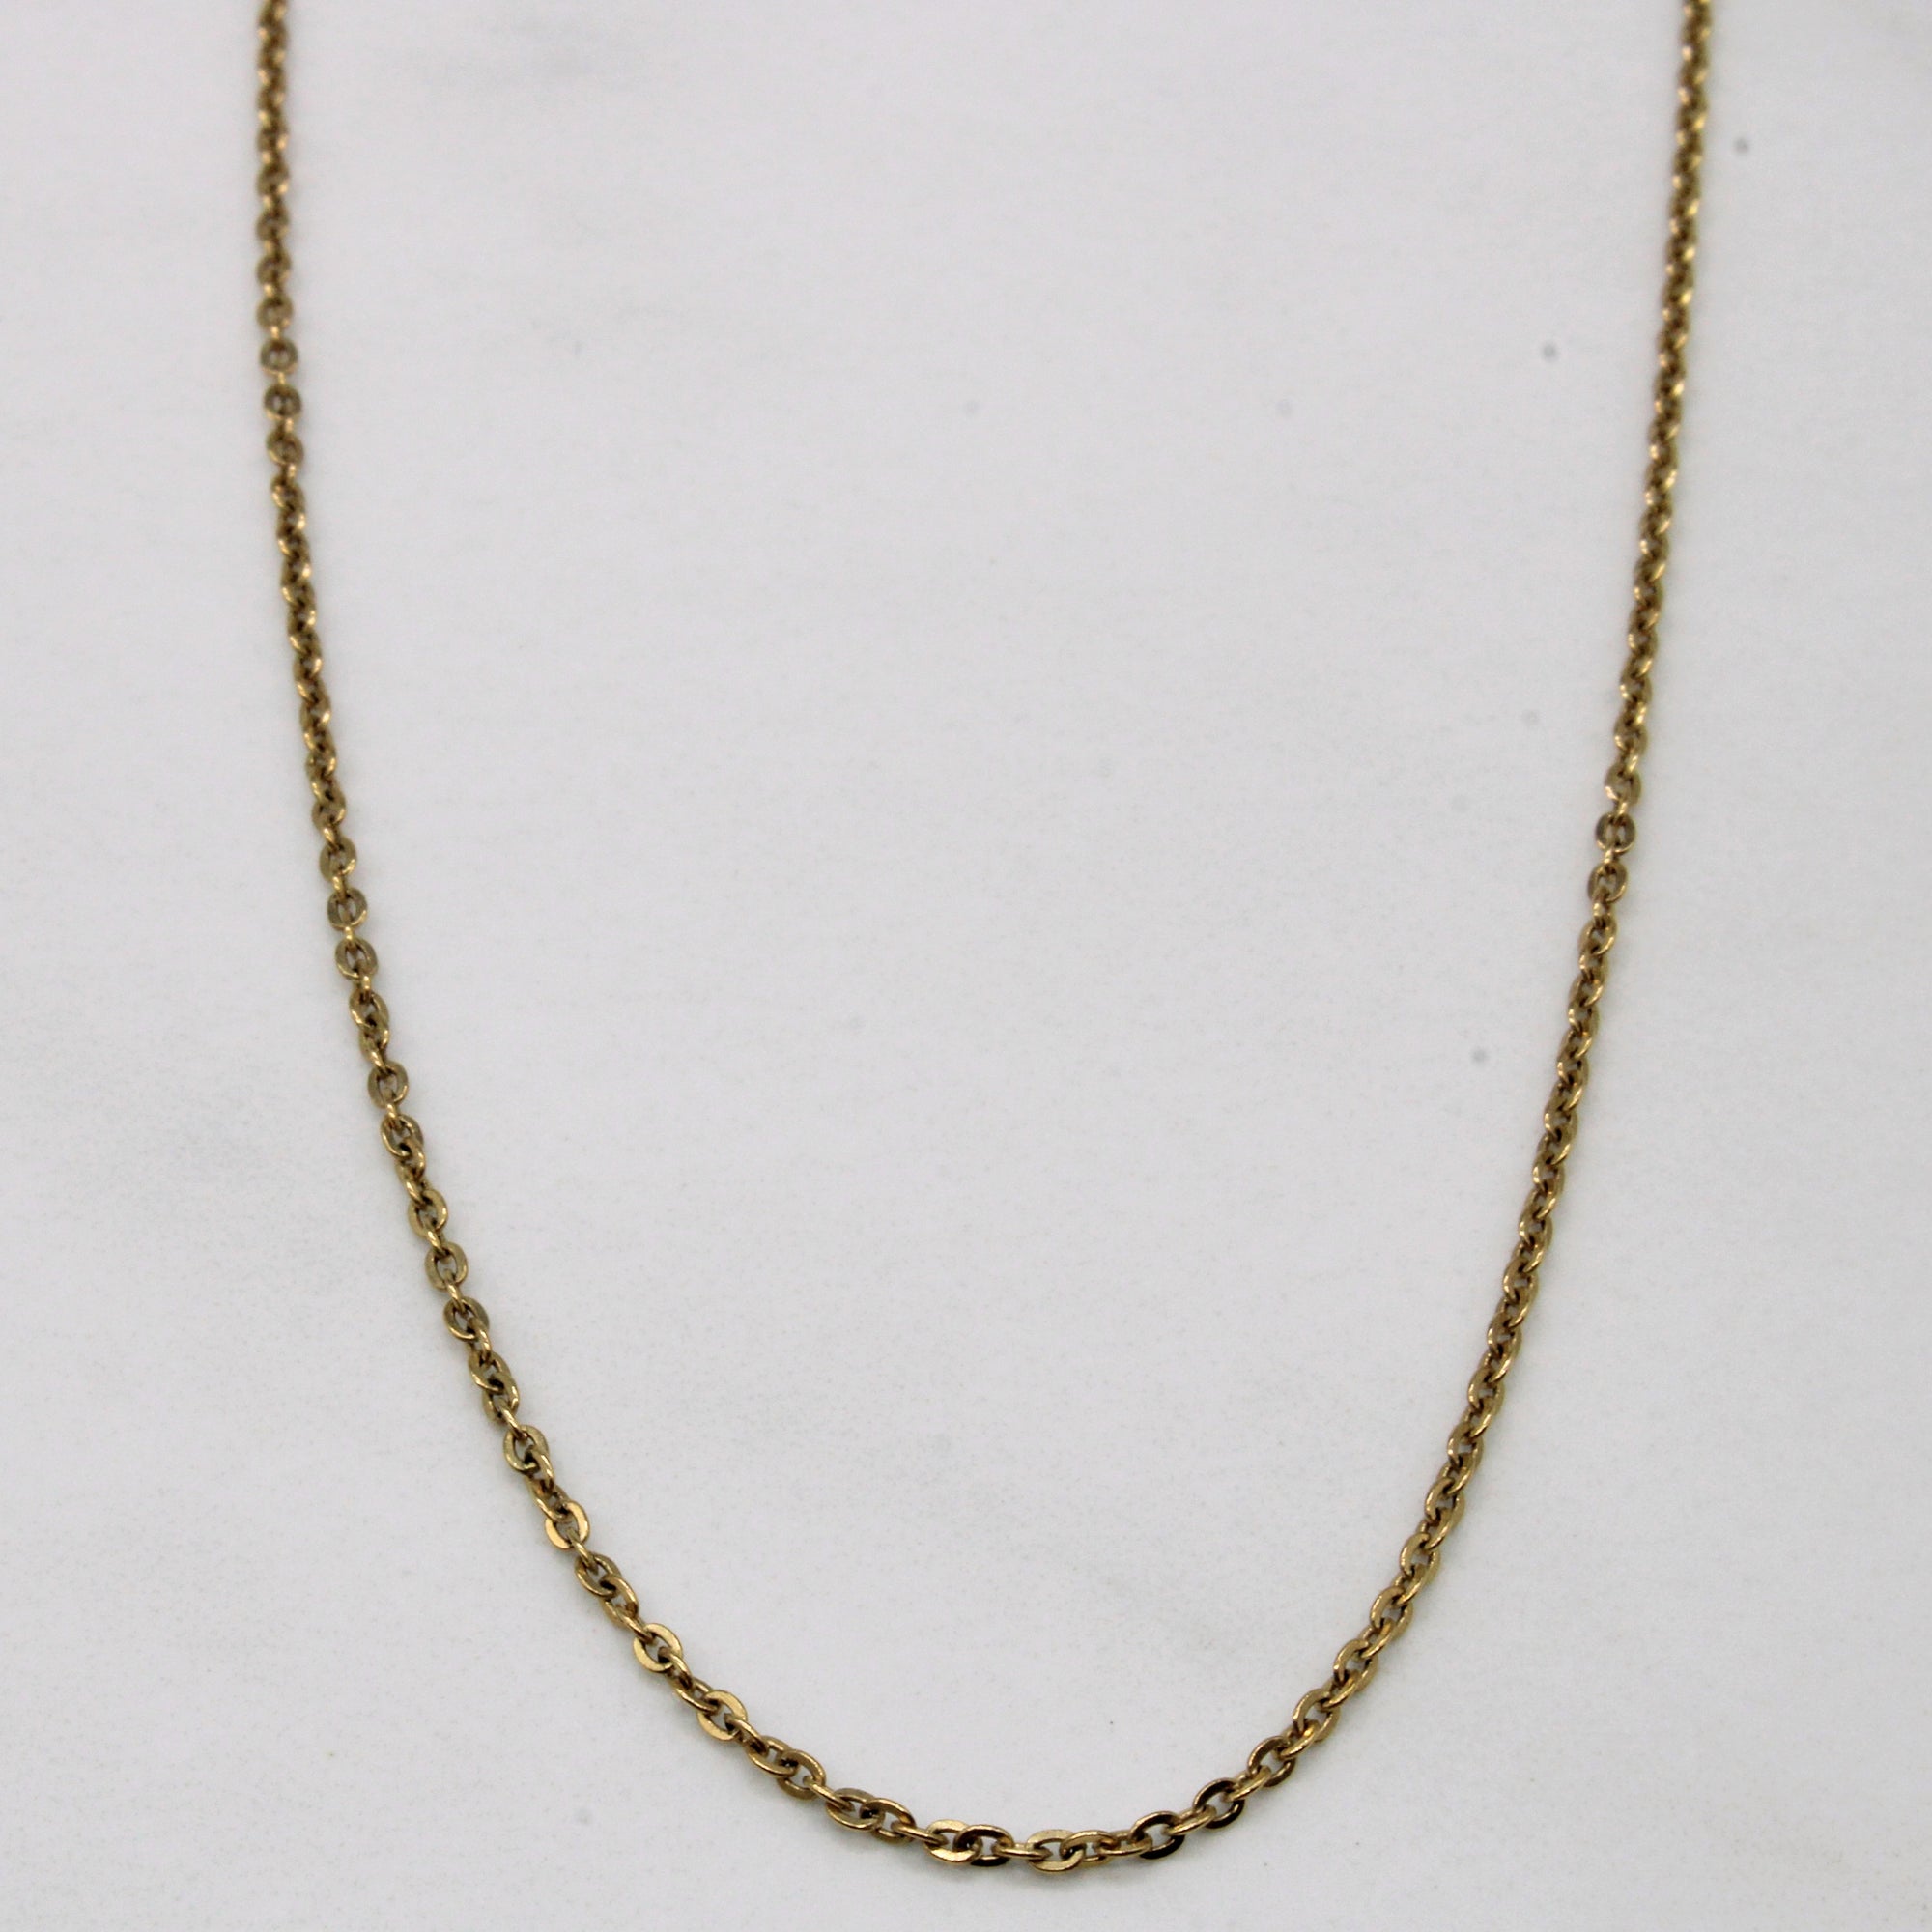 10k Yellow Gold Oval Link Chain | 16